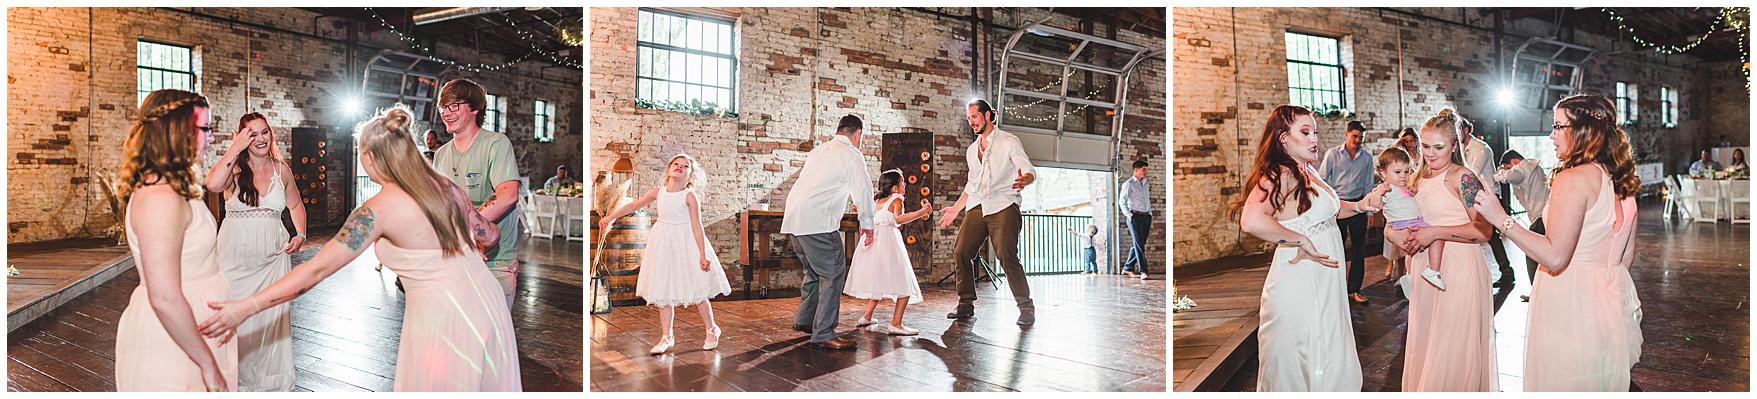 Guests, bride and groom enjoy reception together while dancing to great music